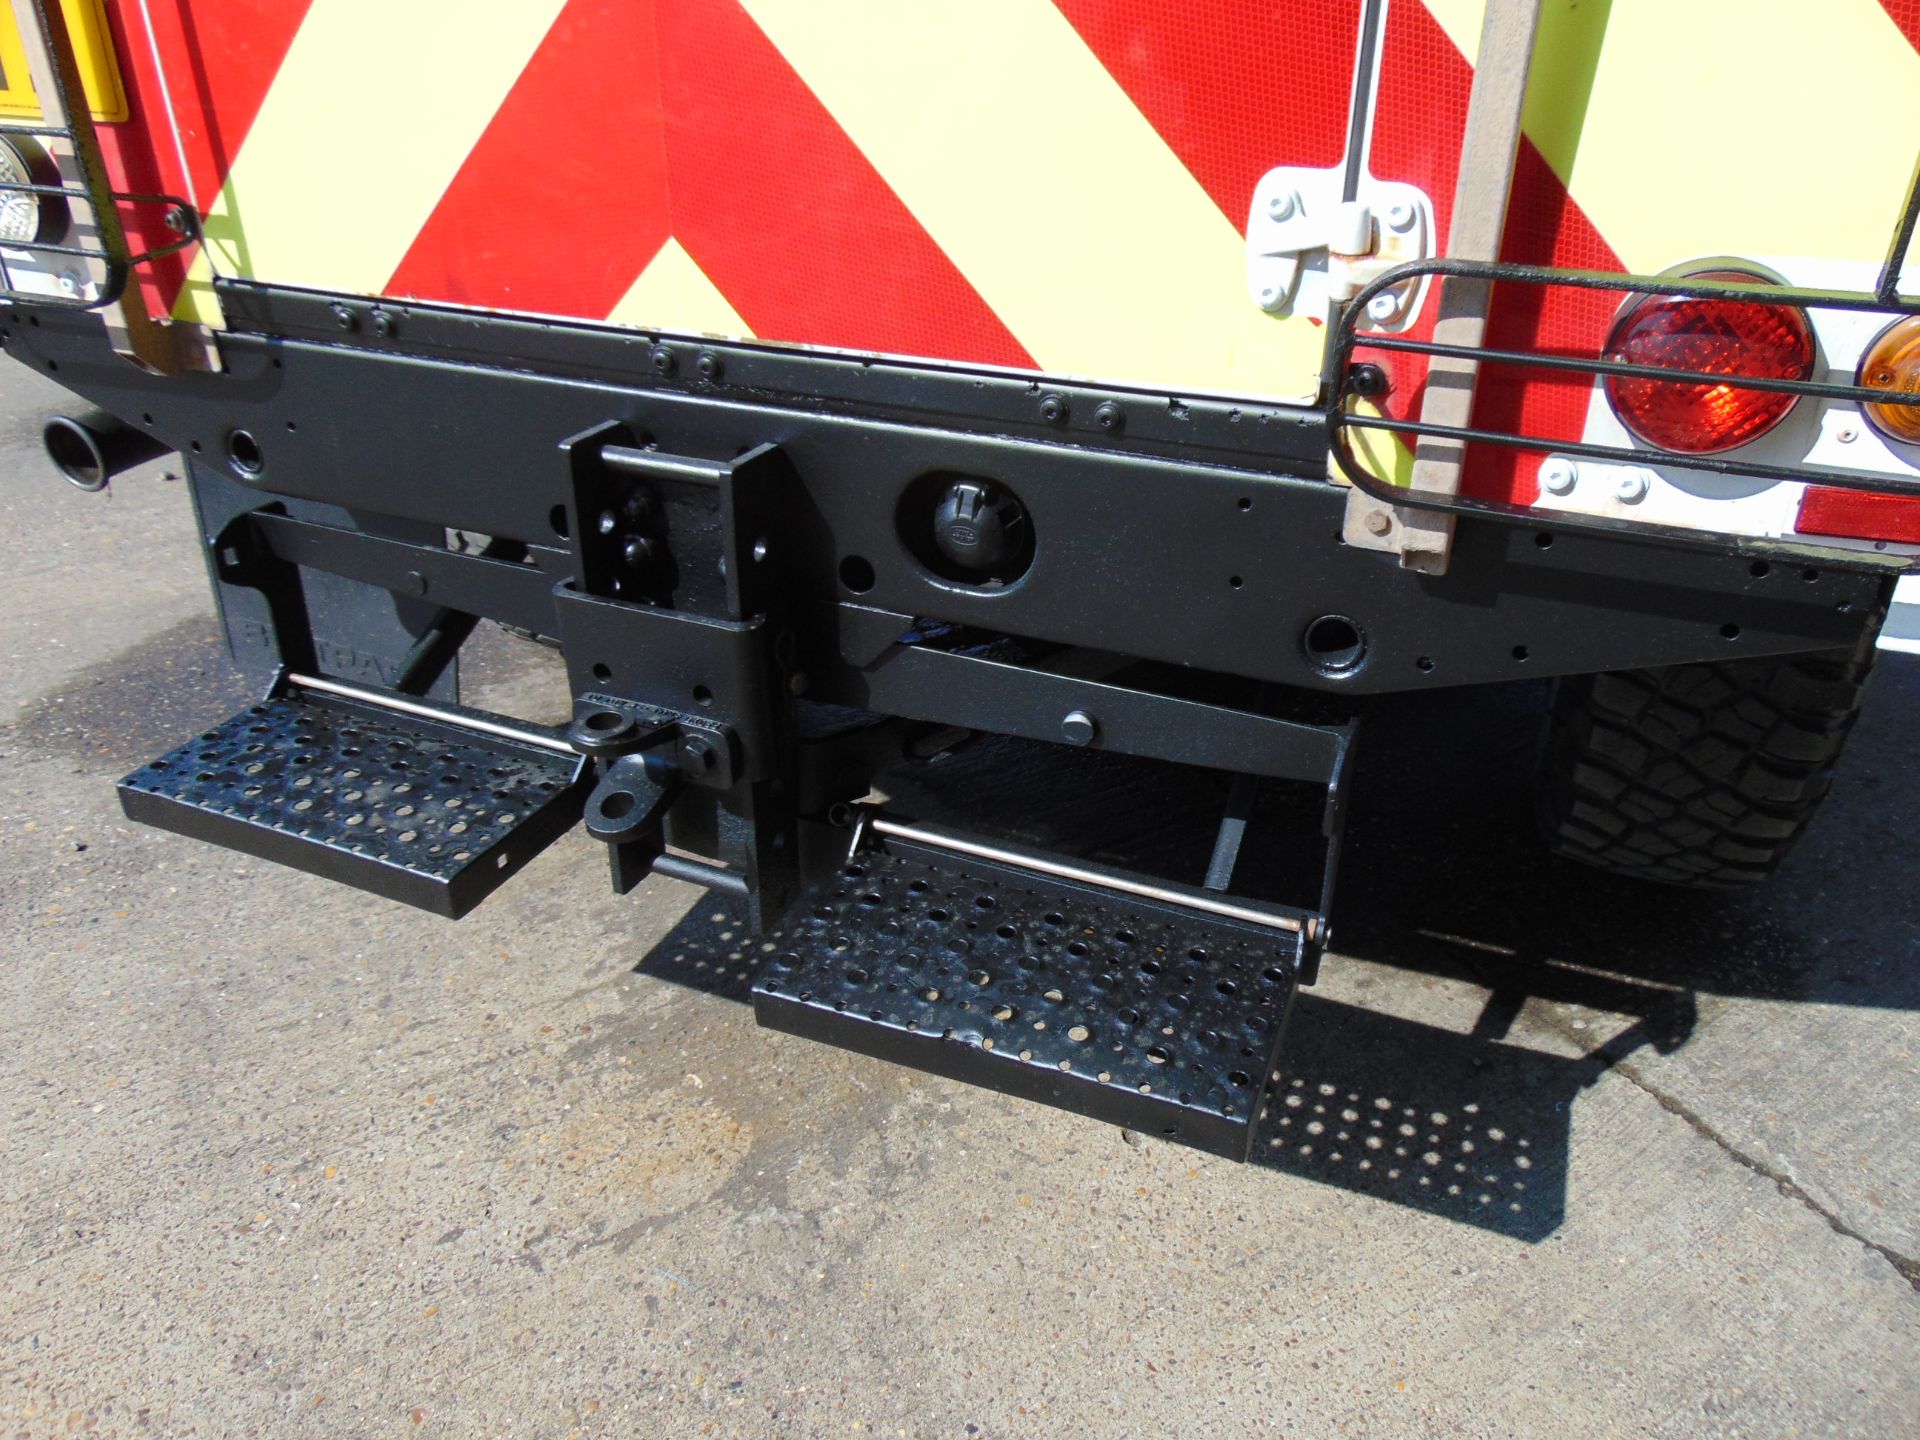 2011 Land Rover Defender 110 Puma hardtop 4x4 Utility vehicle (mobile workshop) with hydraulic winch - Image 11 of 53